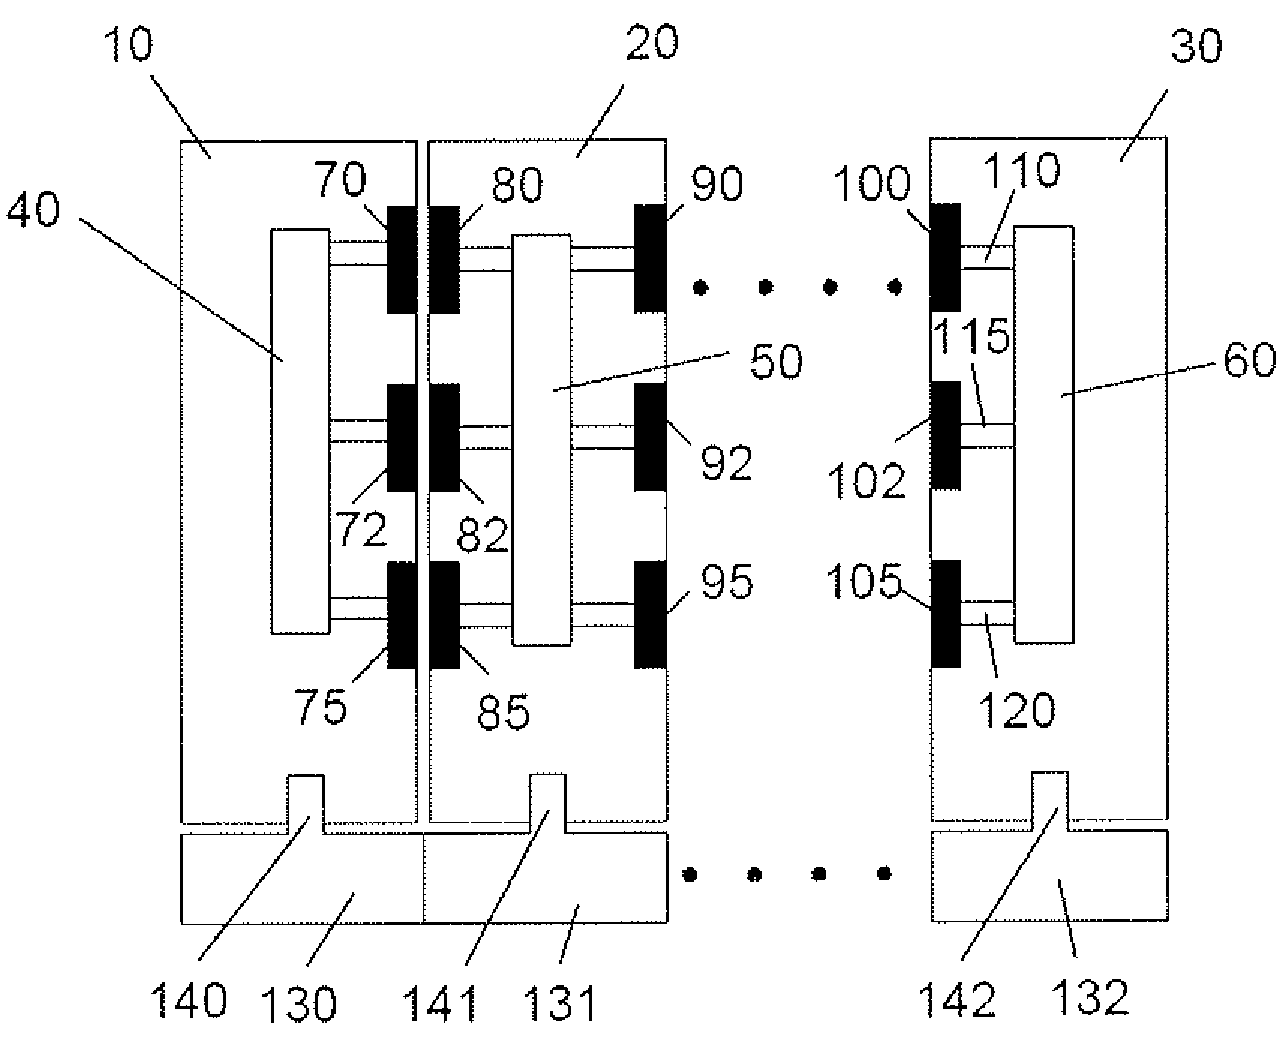 Modular data transmission system with separate energy supply for each connected module